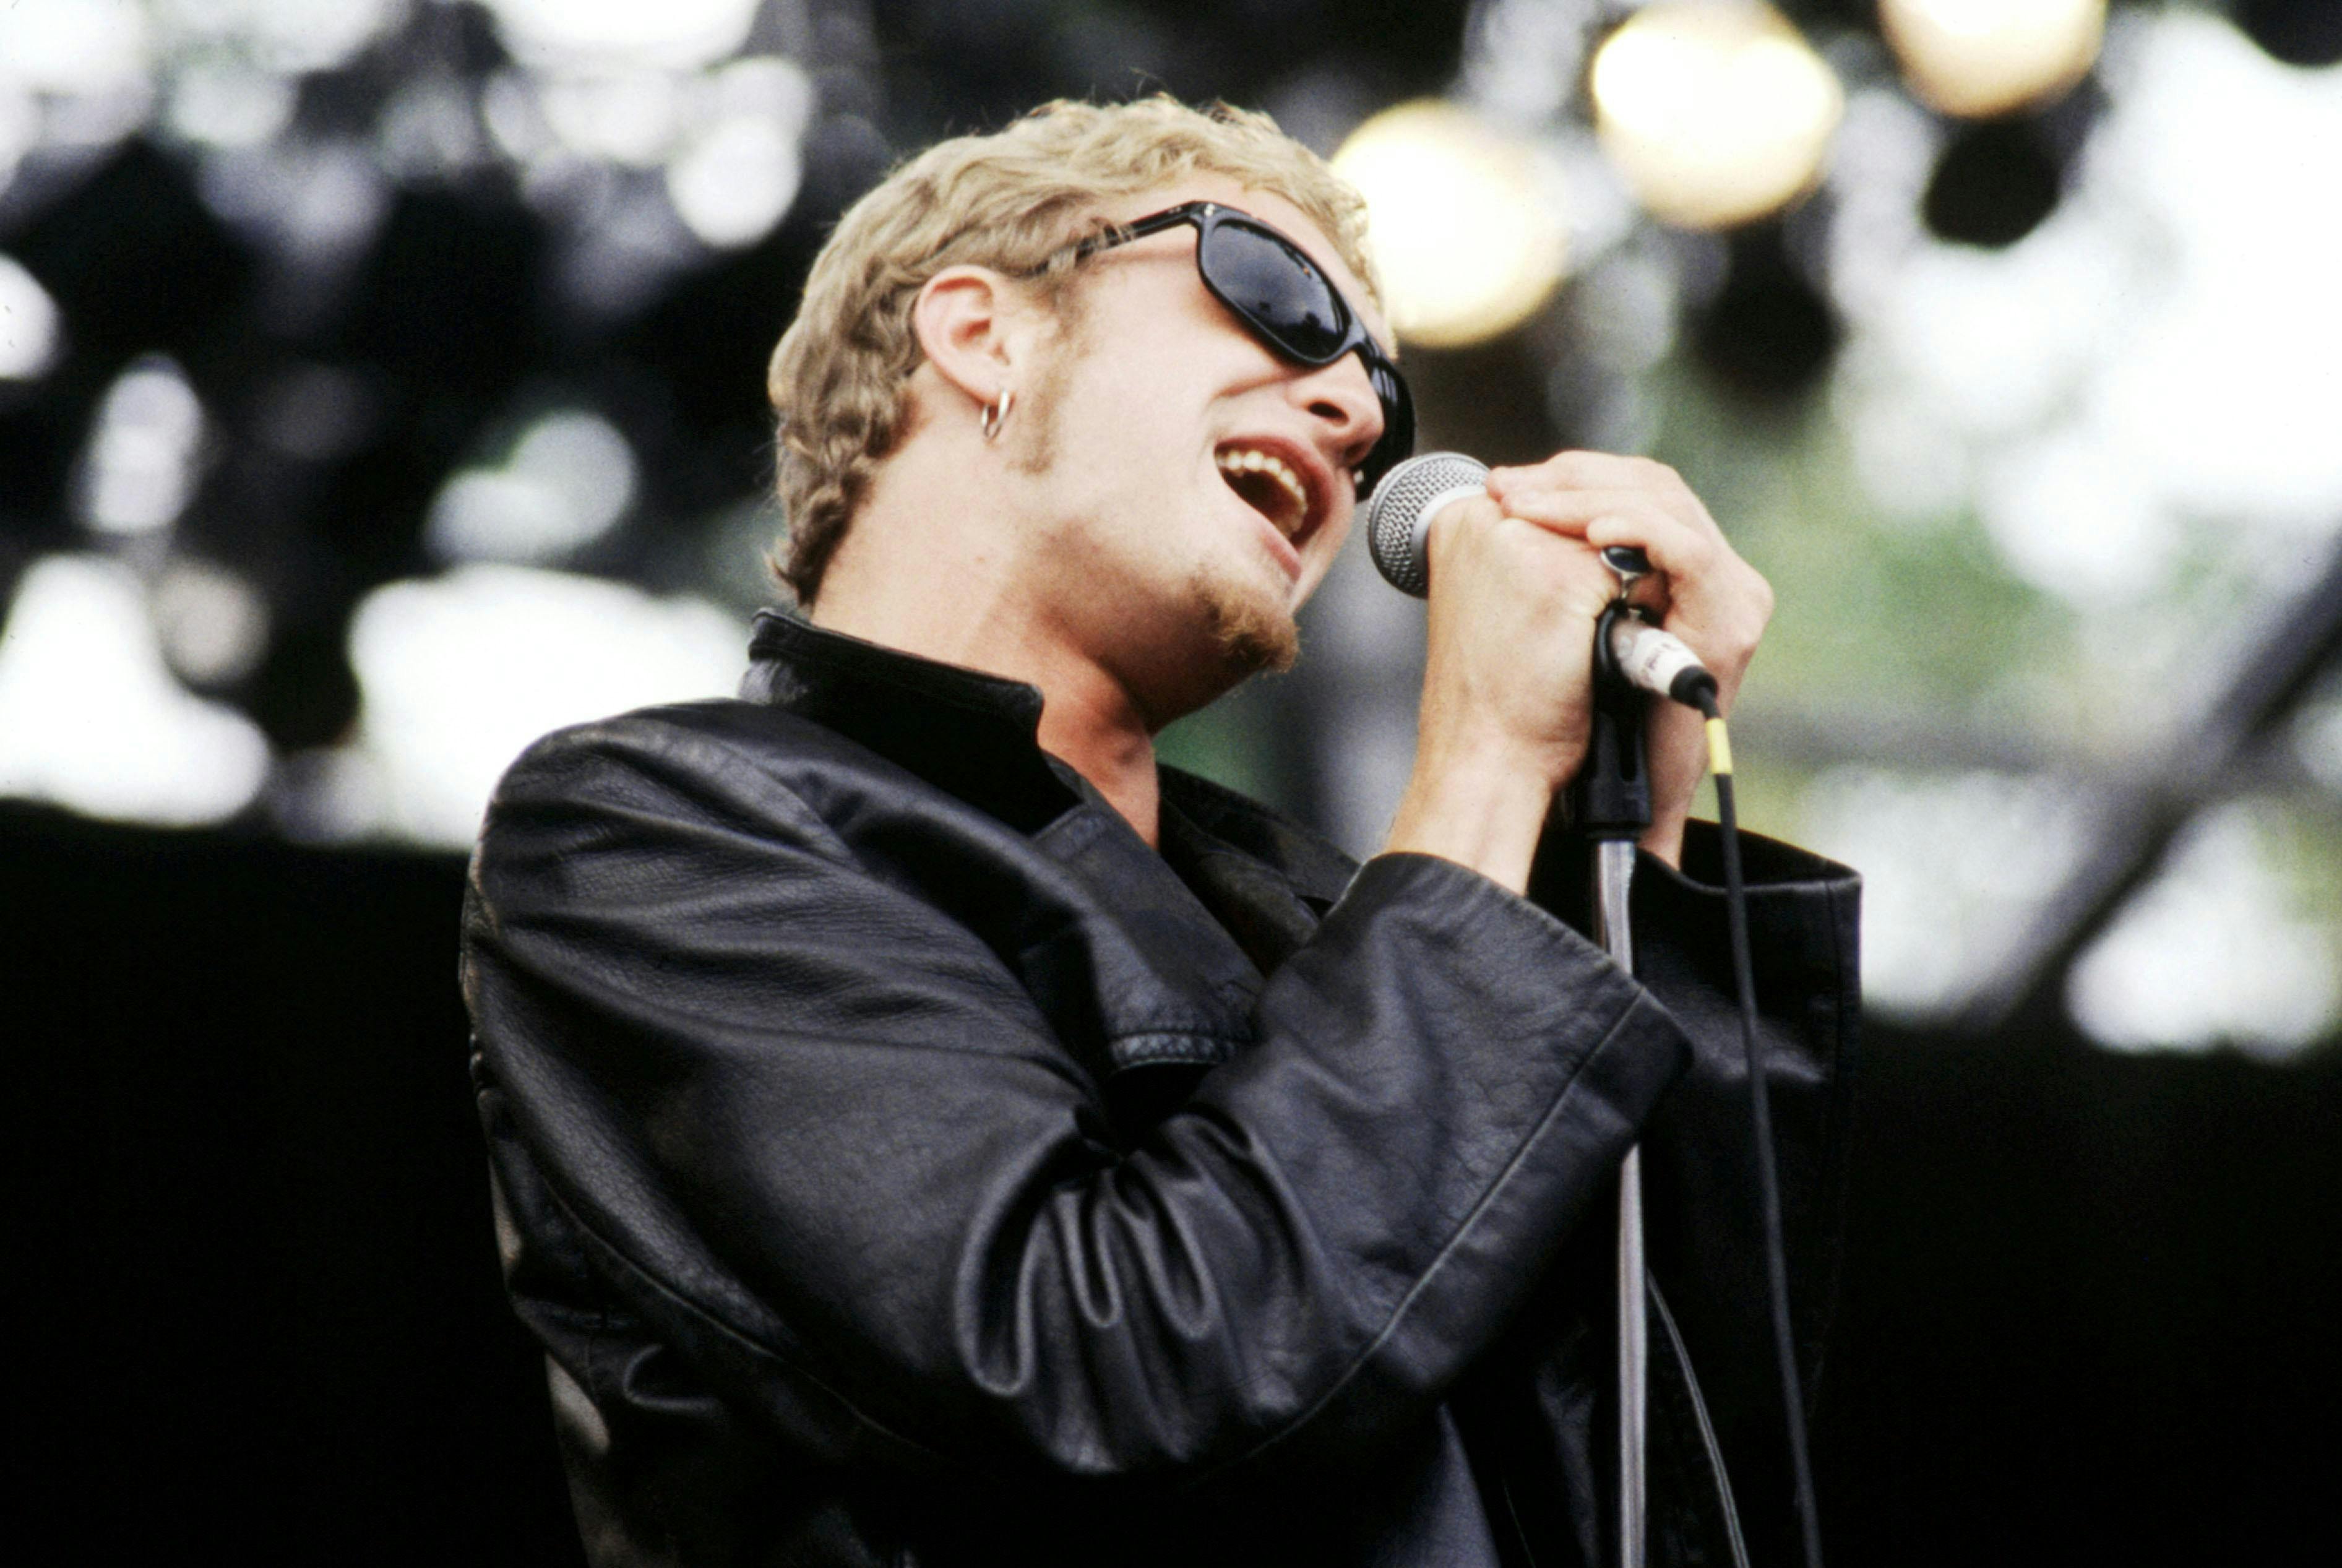 Alice In Chains: The enigmatic power and inner torment of Layne Staley